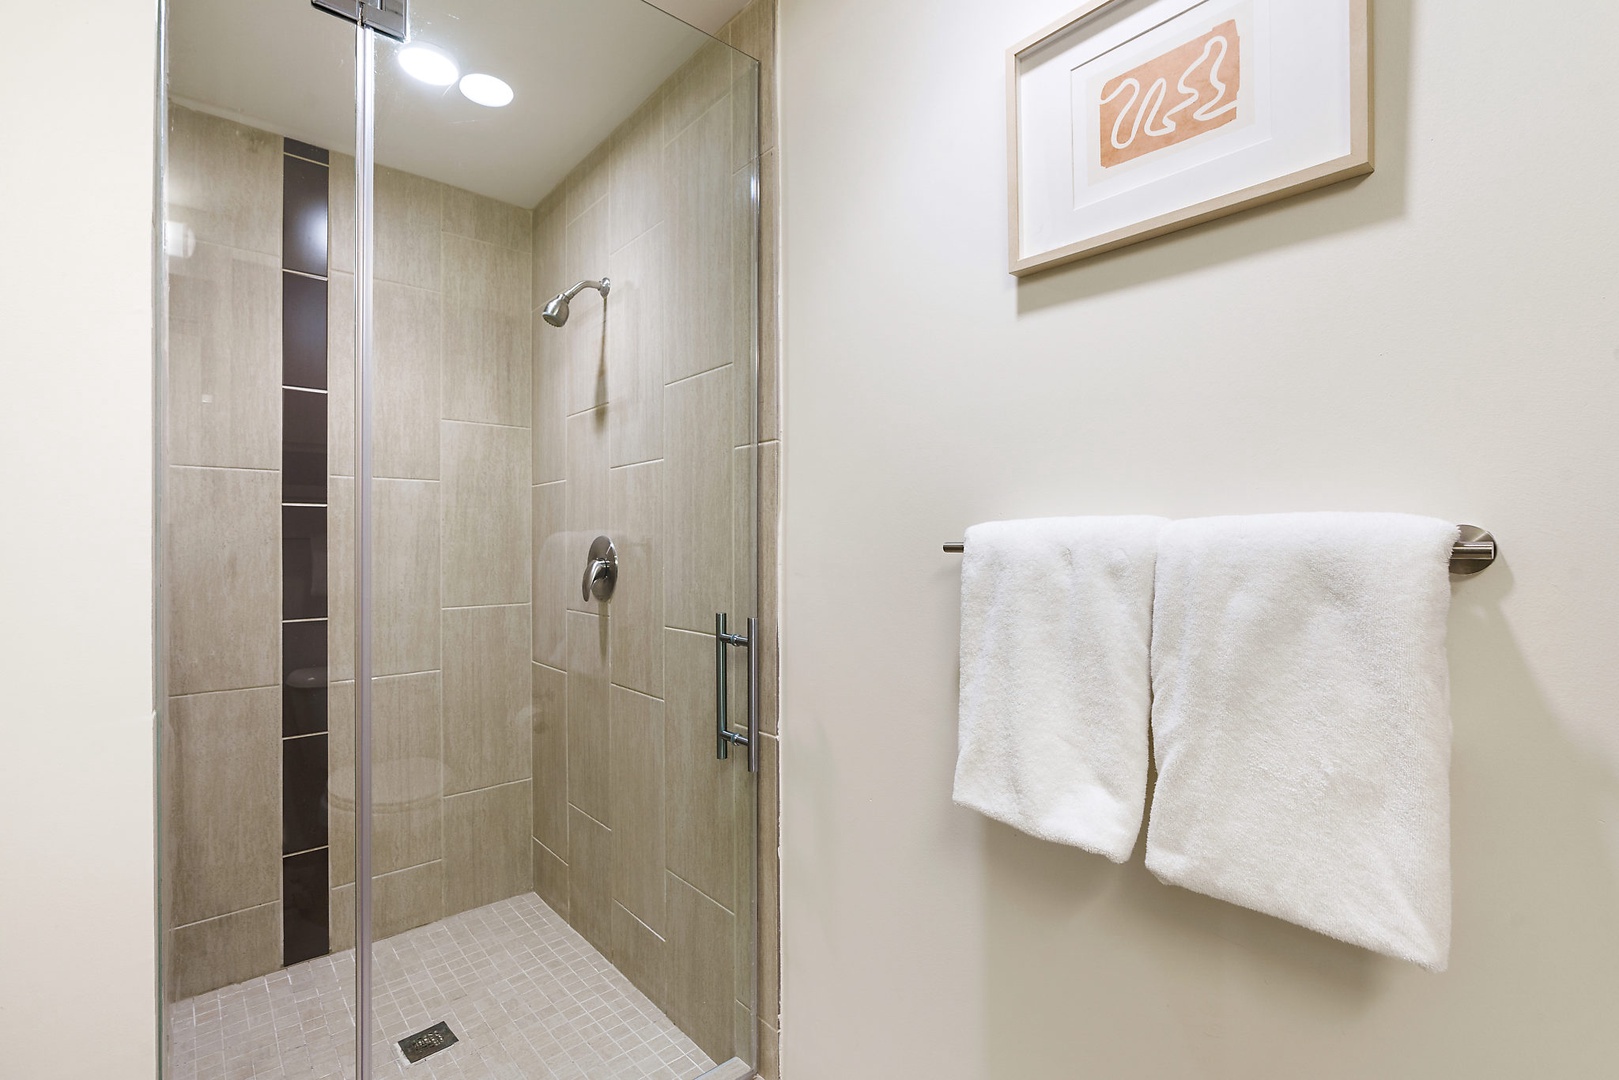 Enjoy a fresh start in the modern walk-in shower with stylish fixtures.